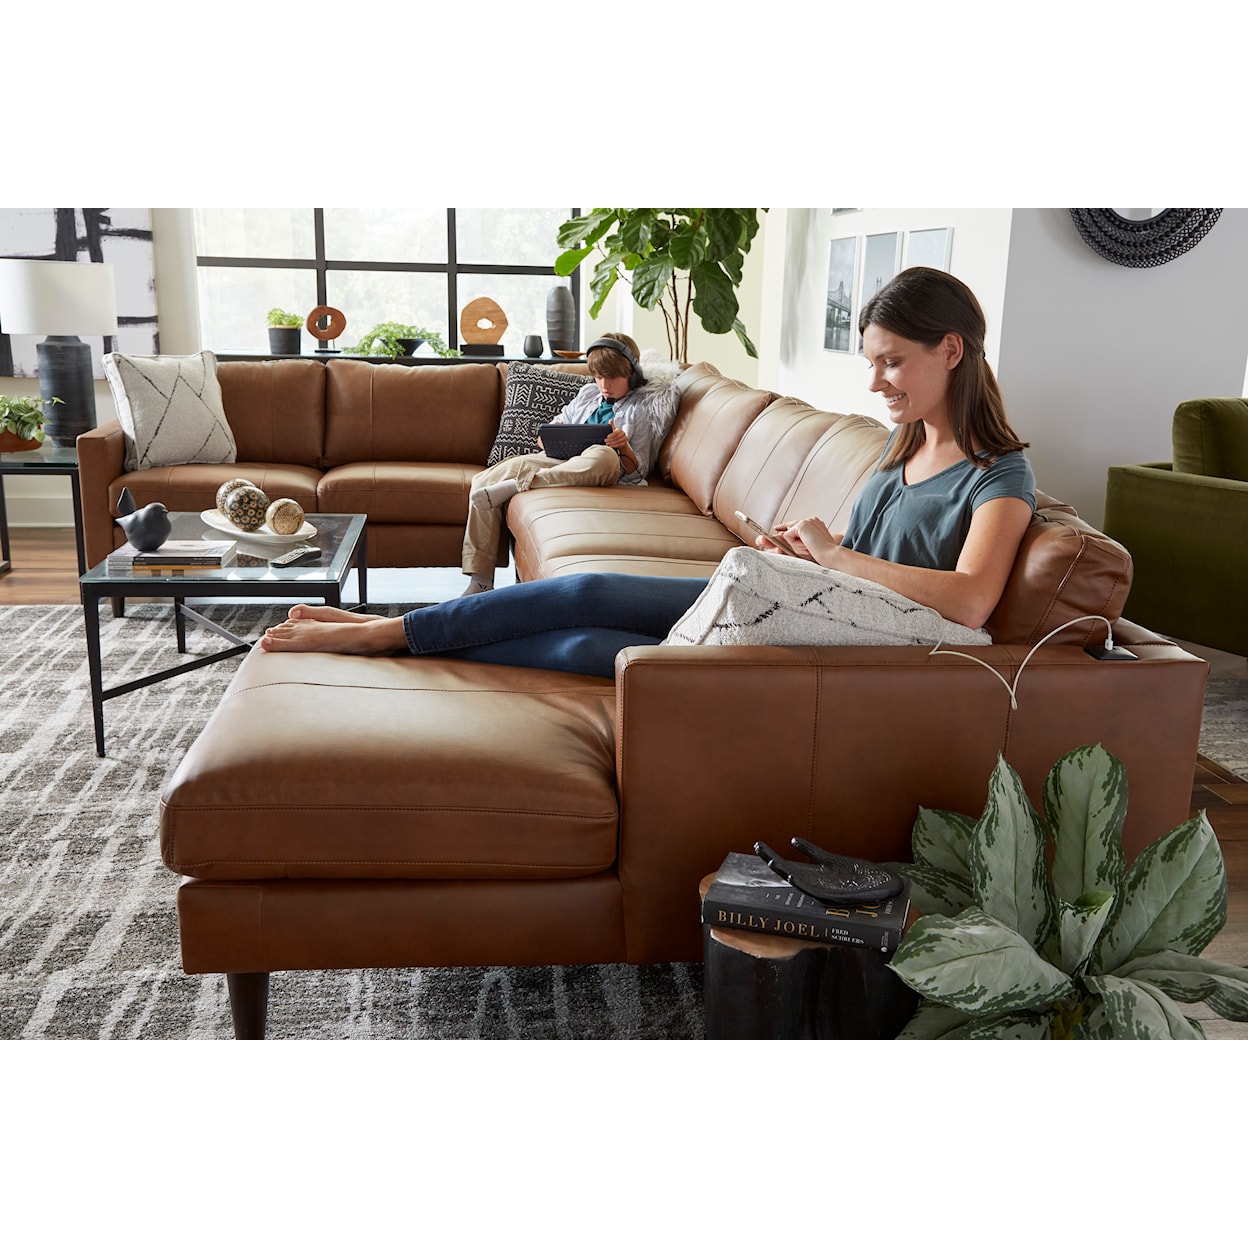 Best Home Furnishings Trafton Leather 6-Seat Sectional Sofa w/ Chaise